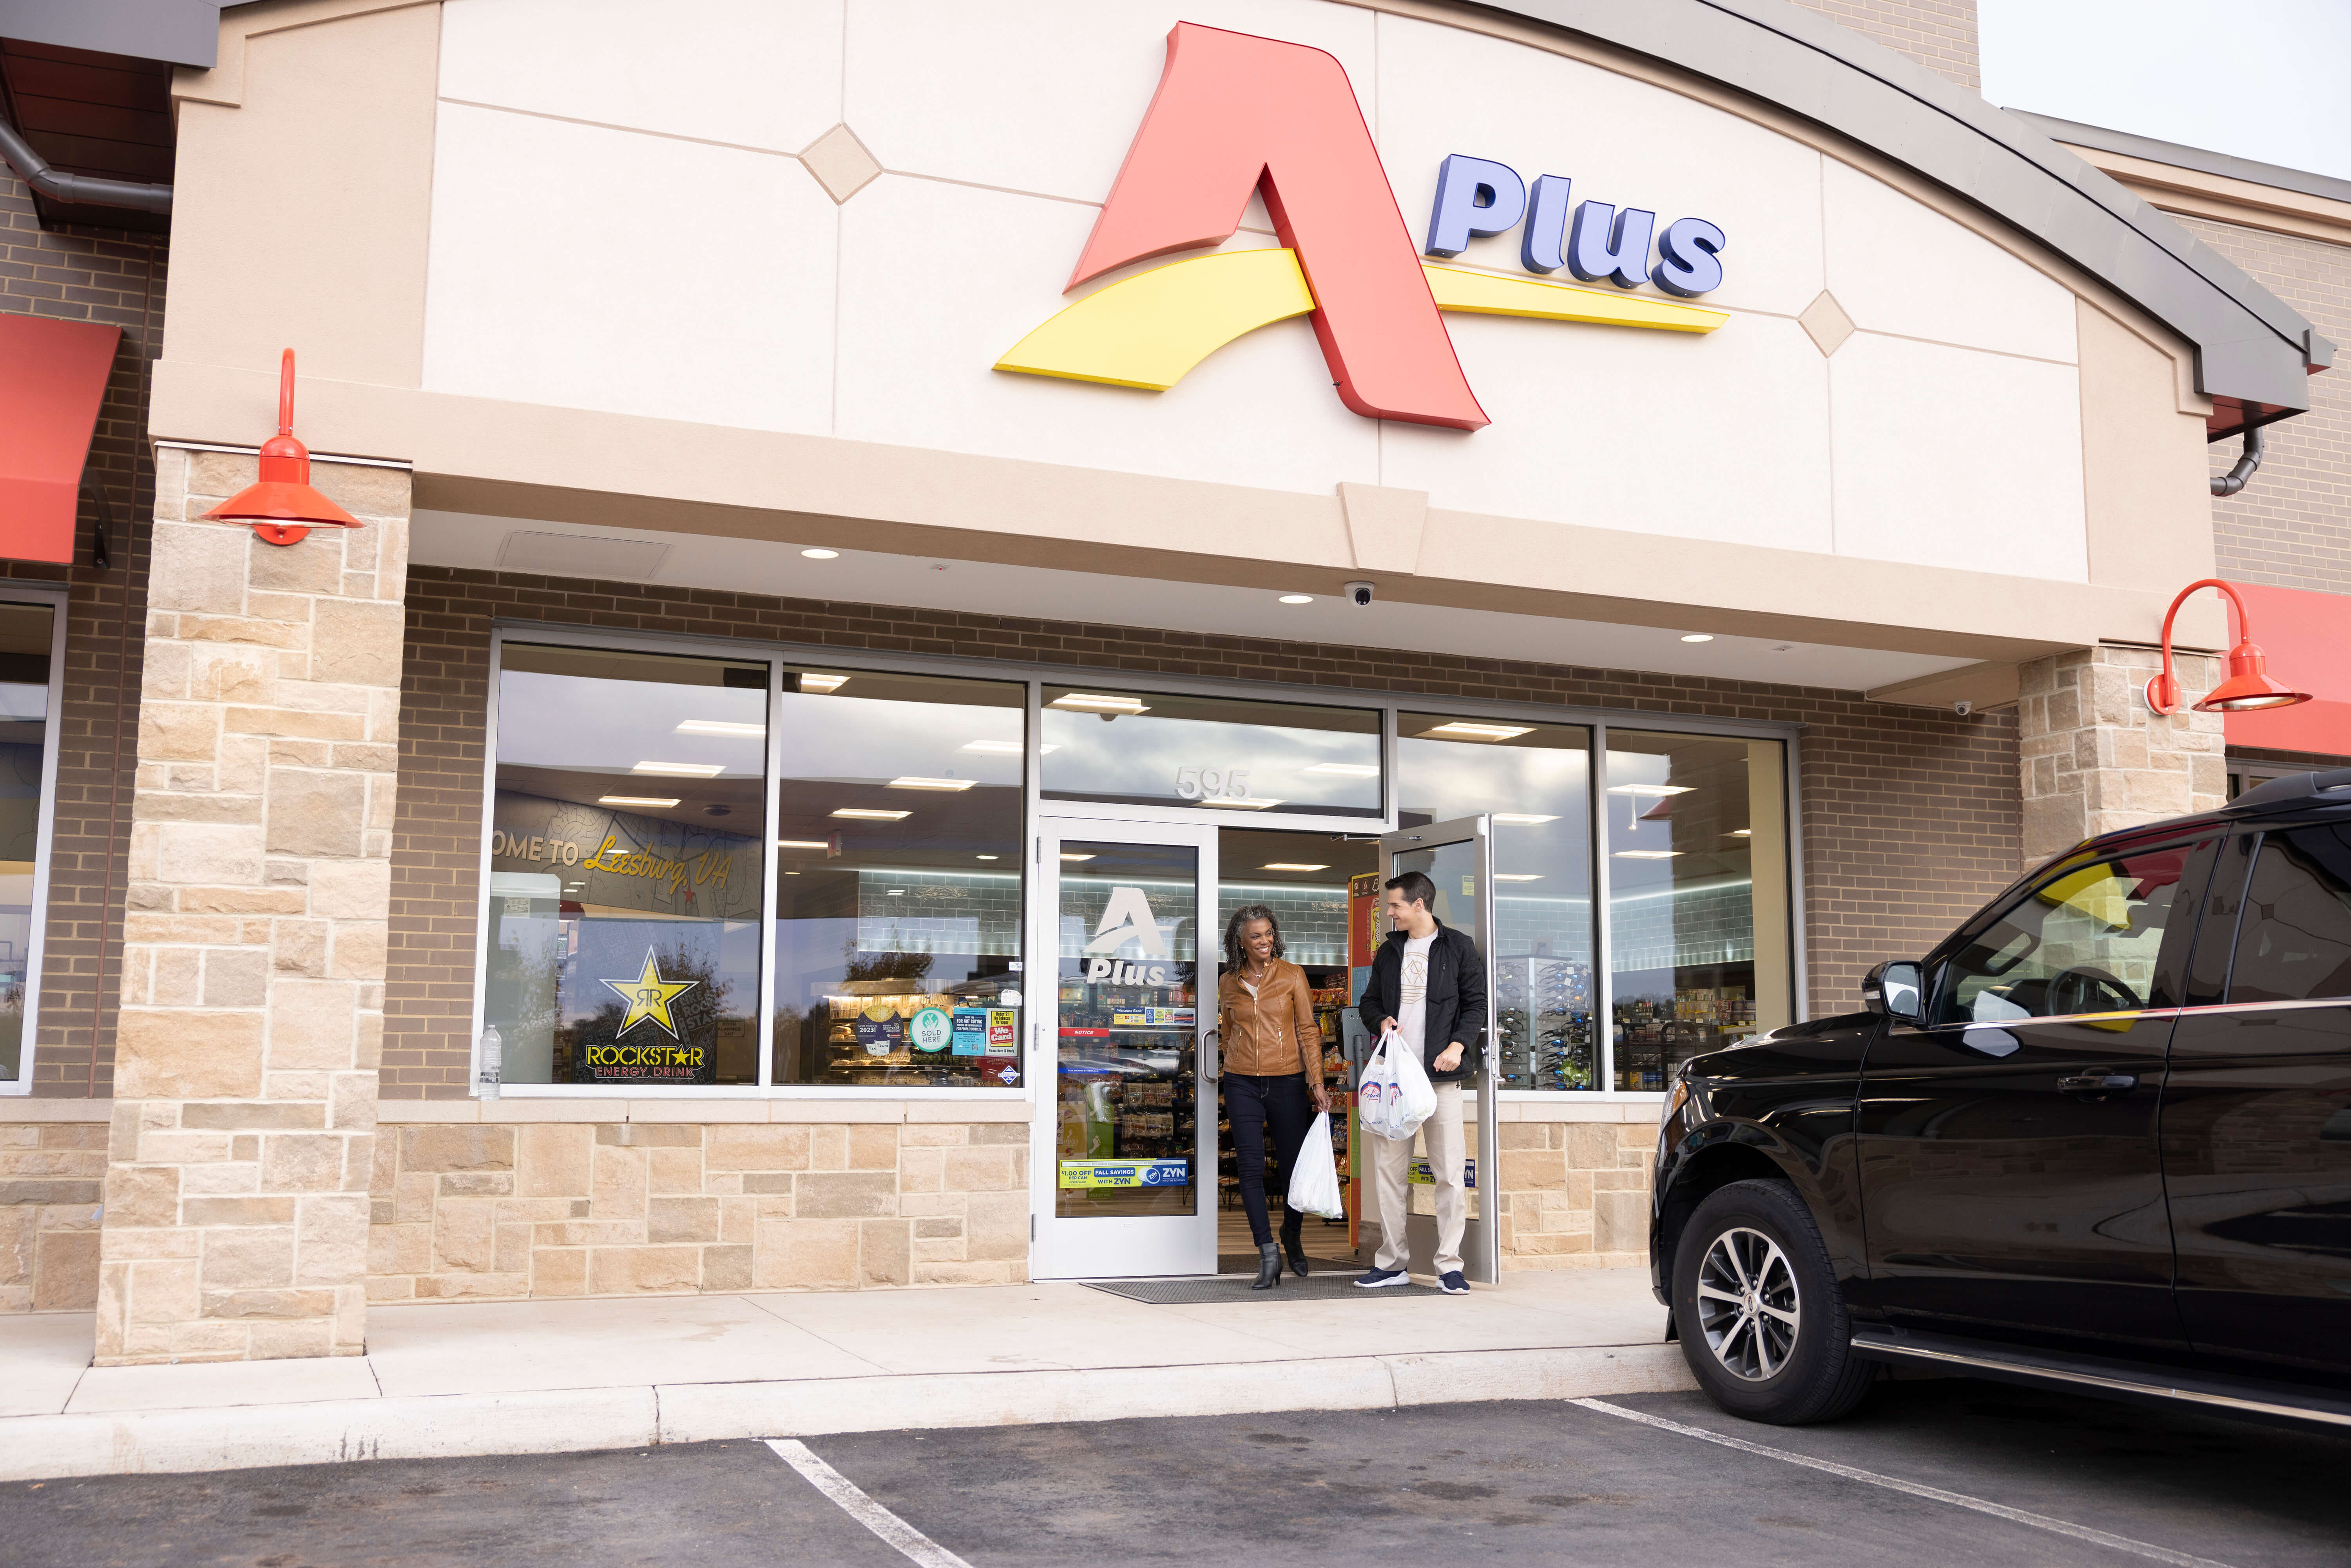 A man and a women exiting an APlus convenience store